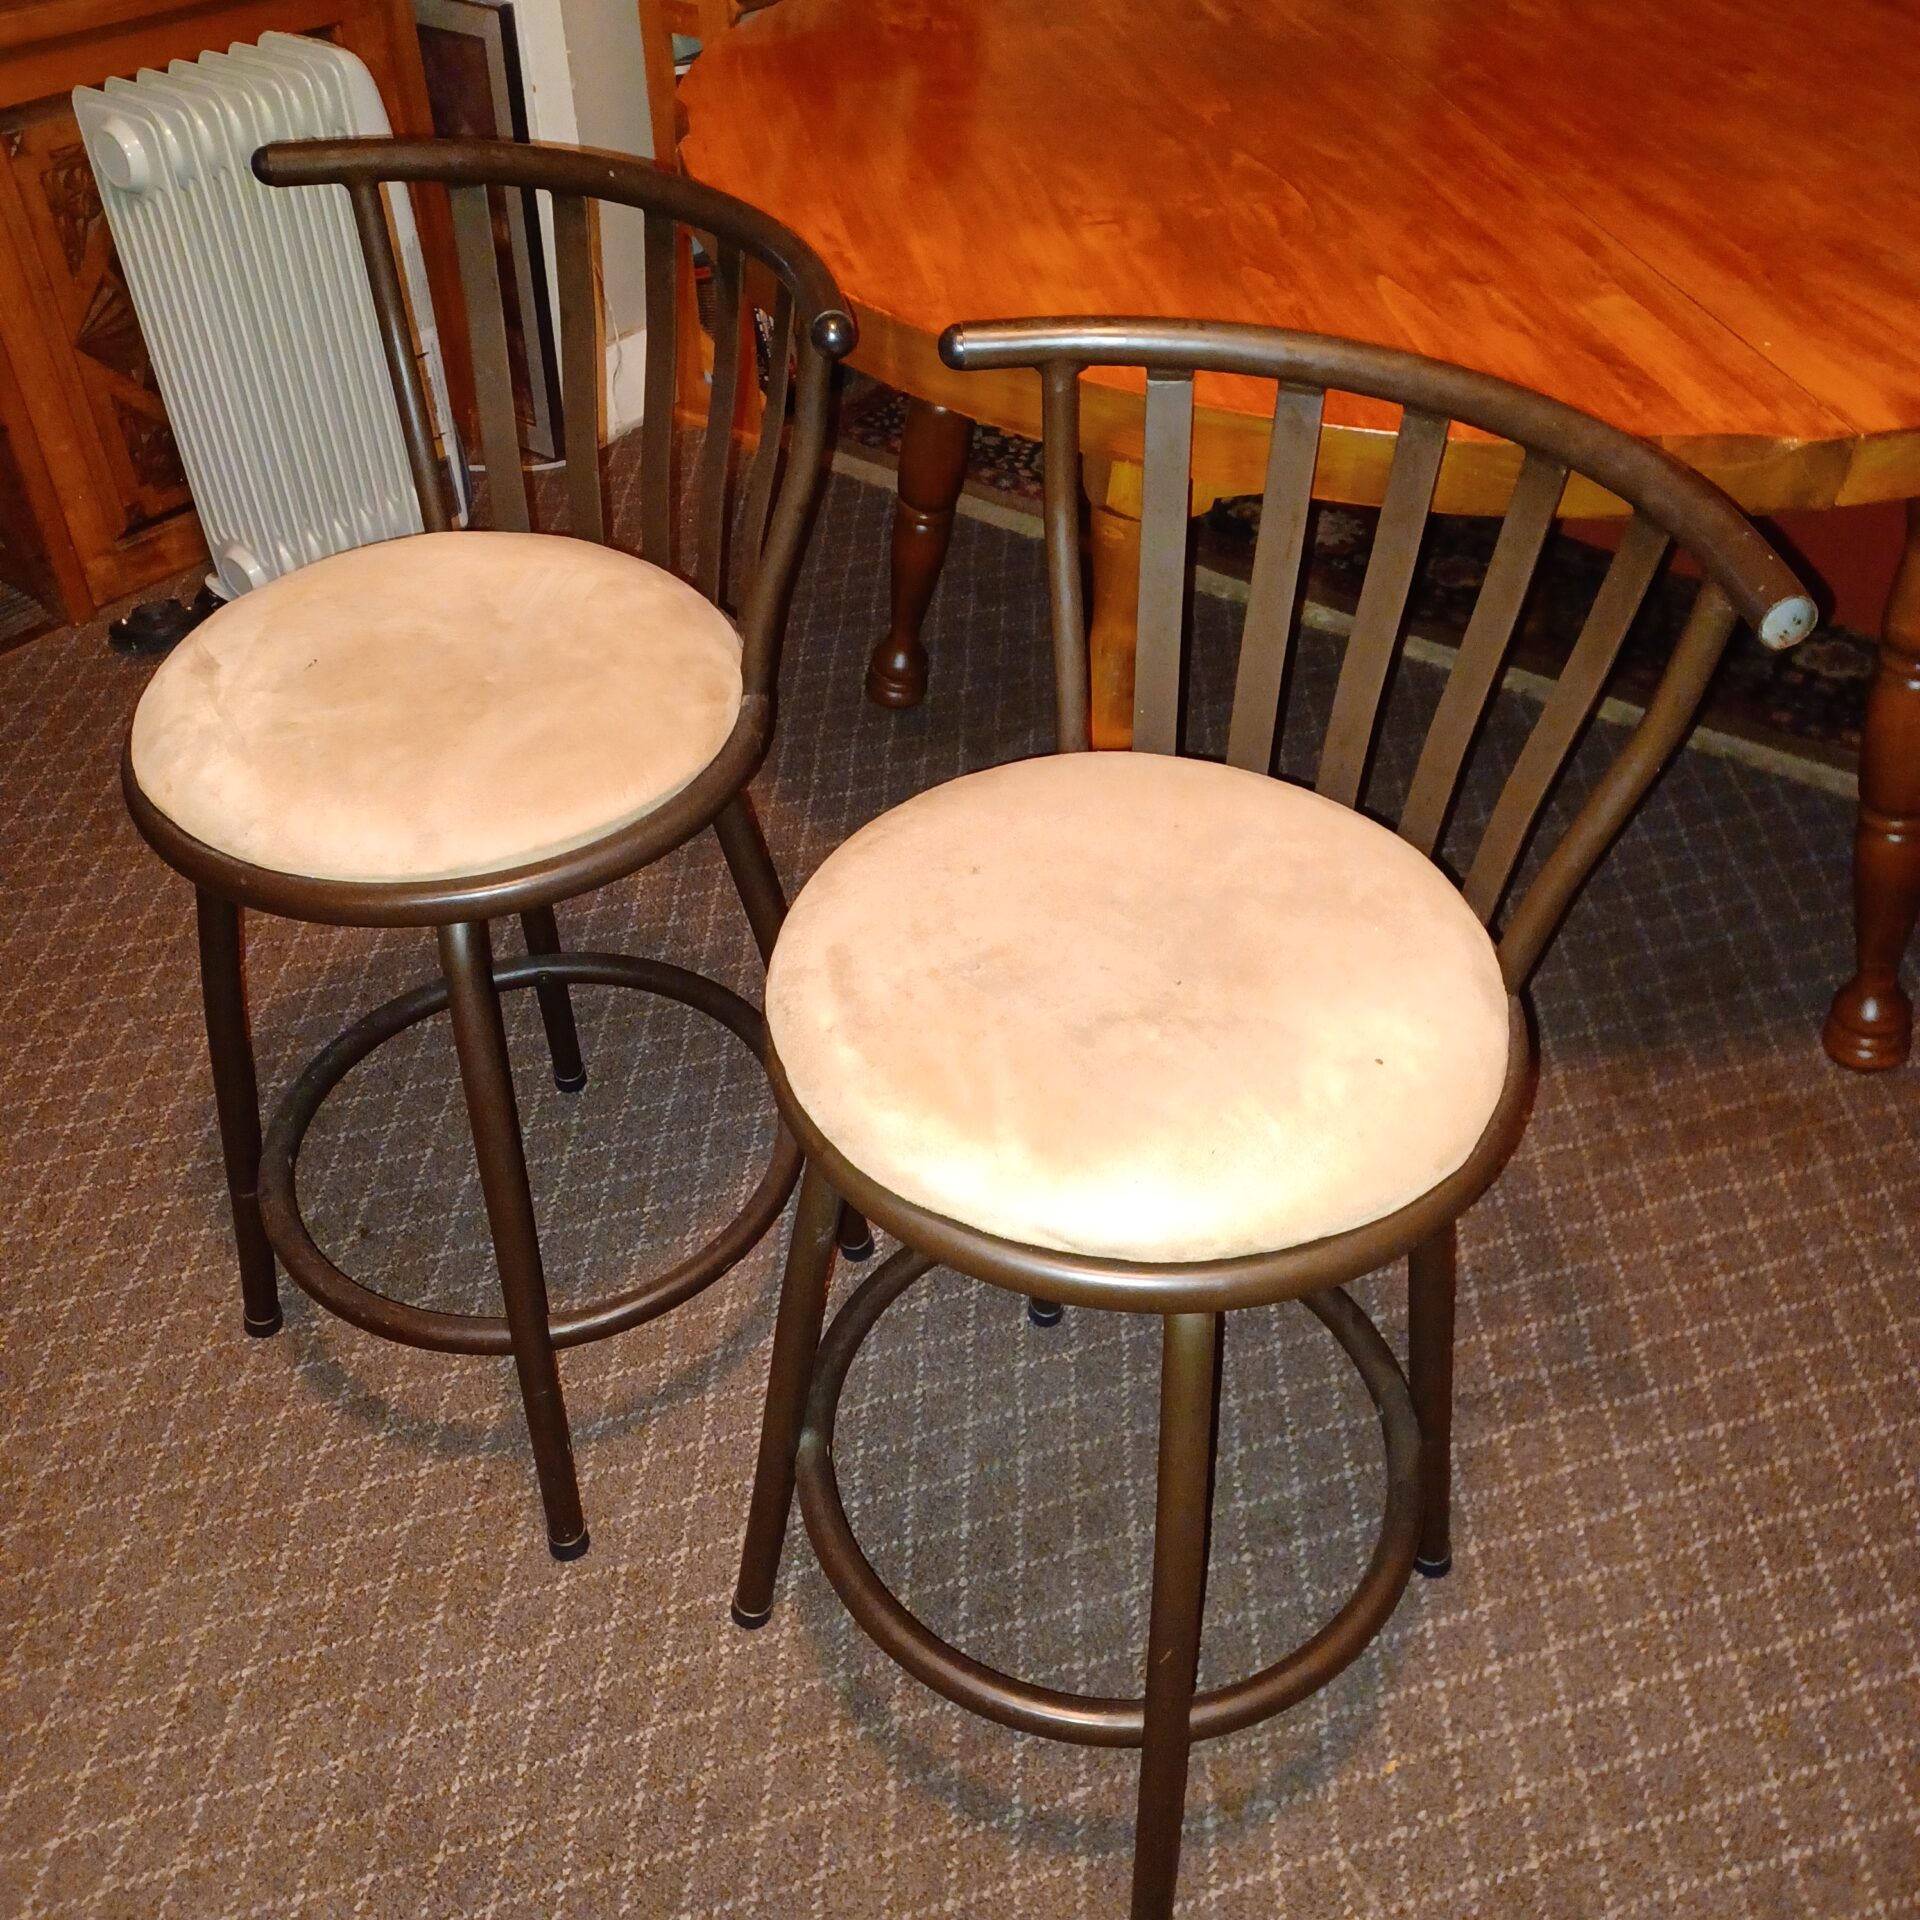 Two short brown bar stools, 24″ seat height, steel